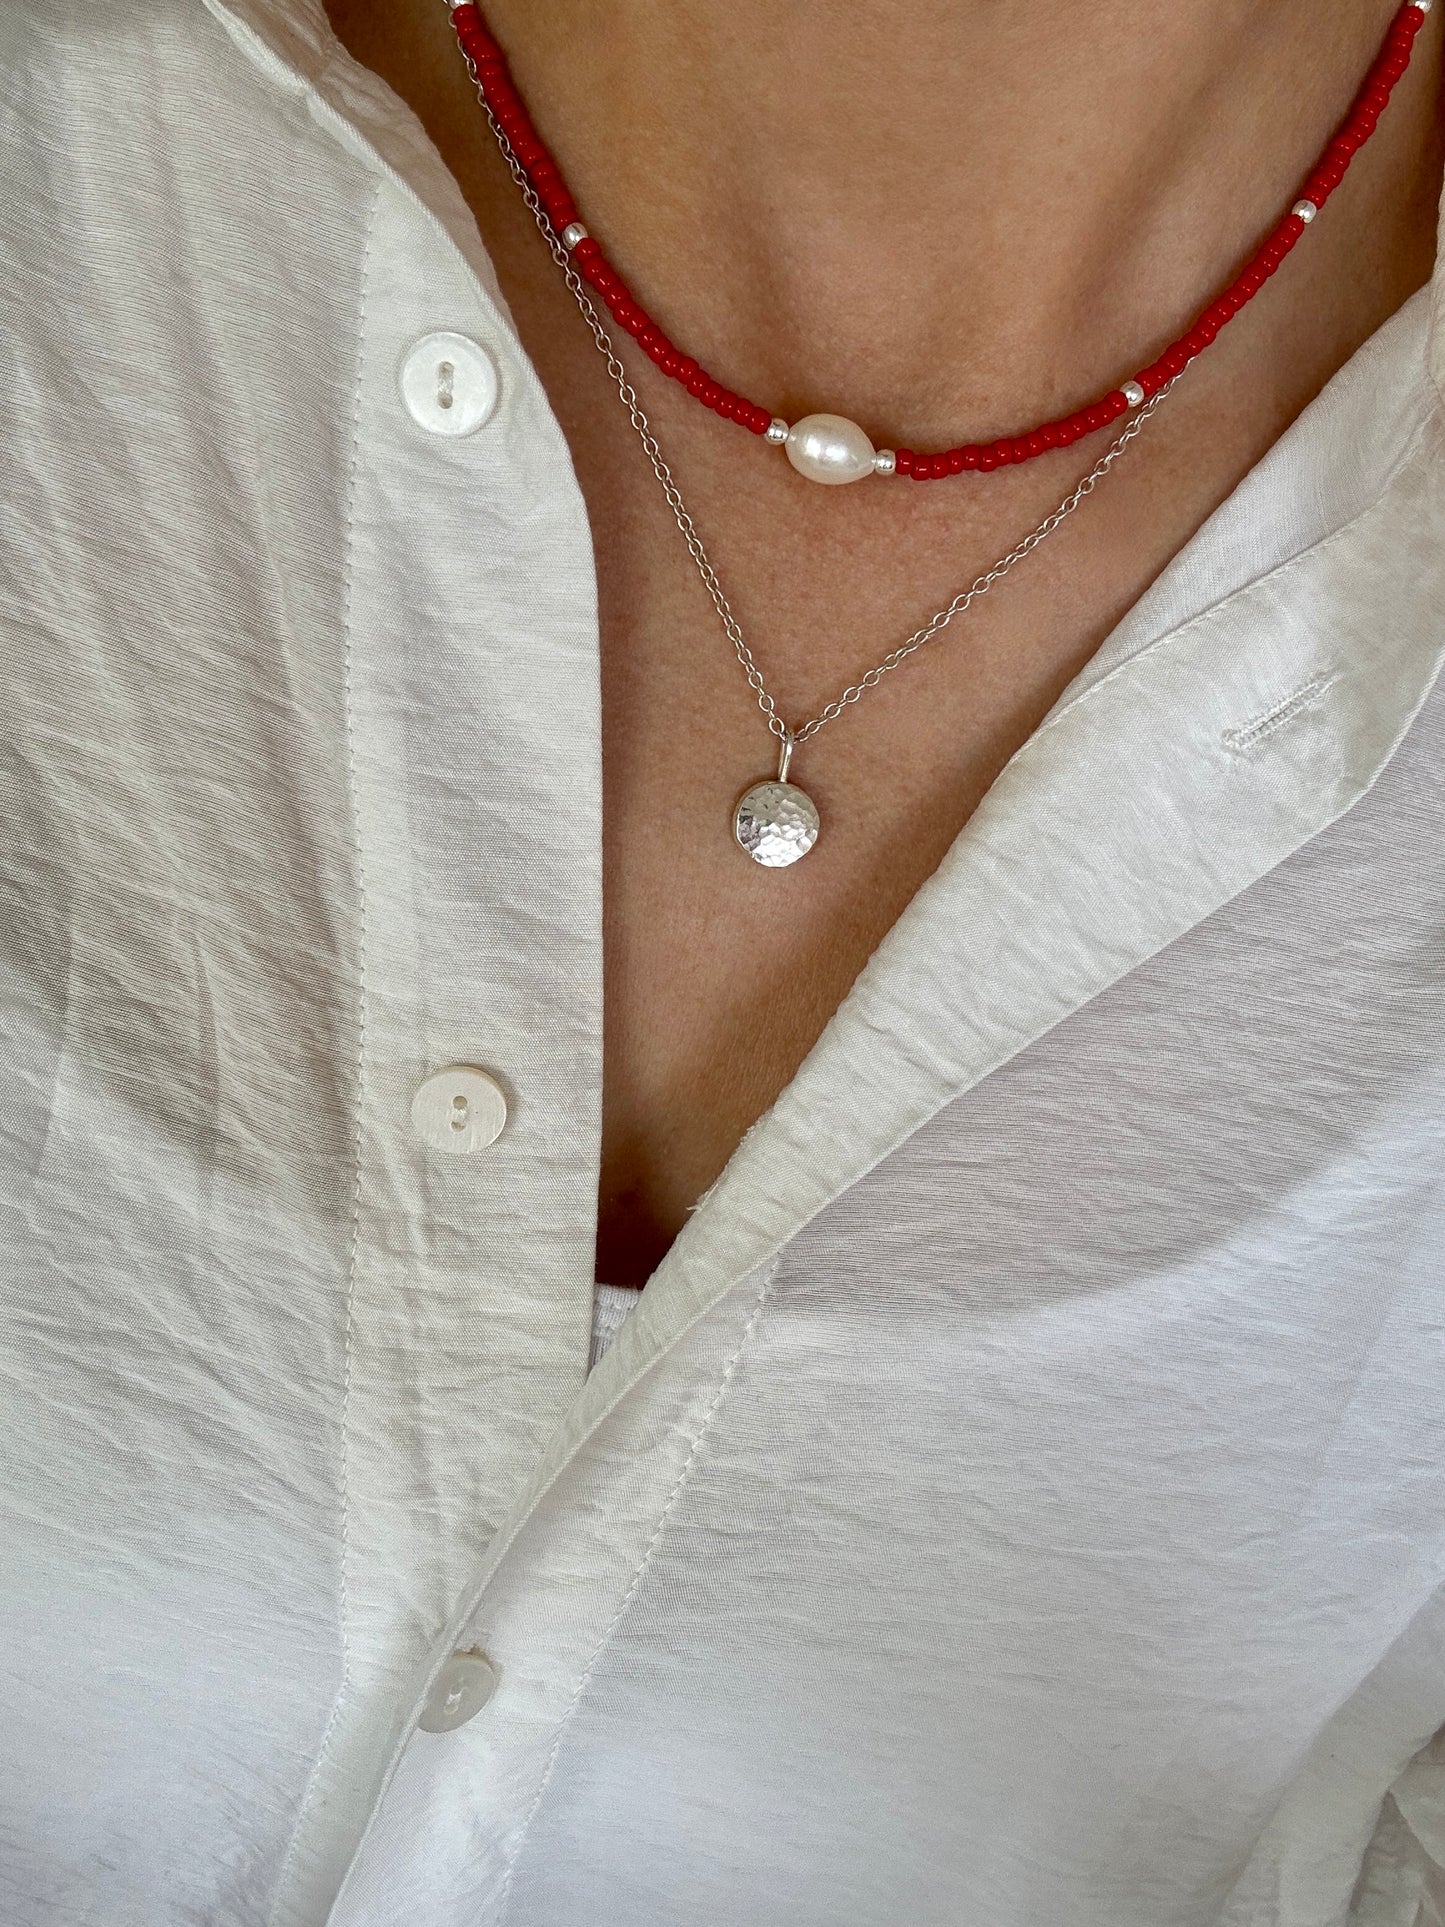 Summer Red Necklace